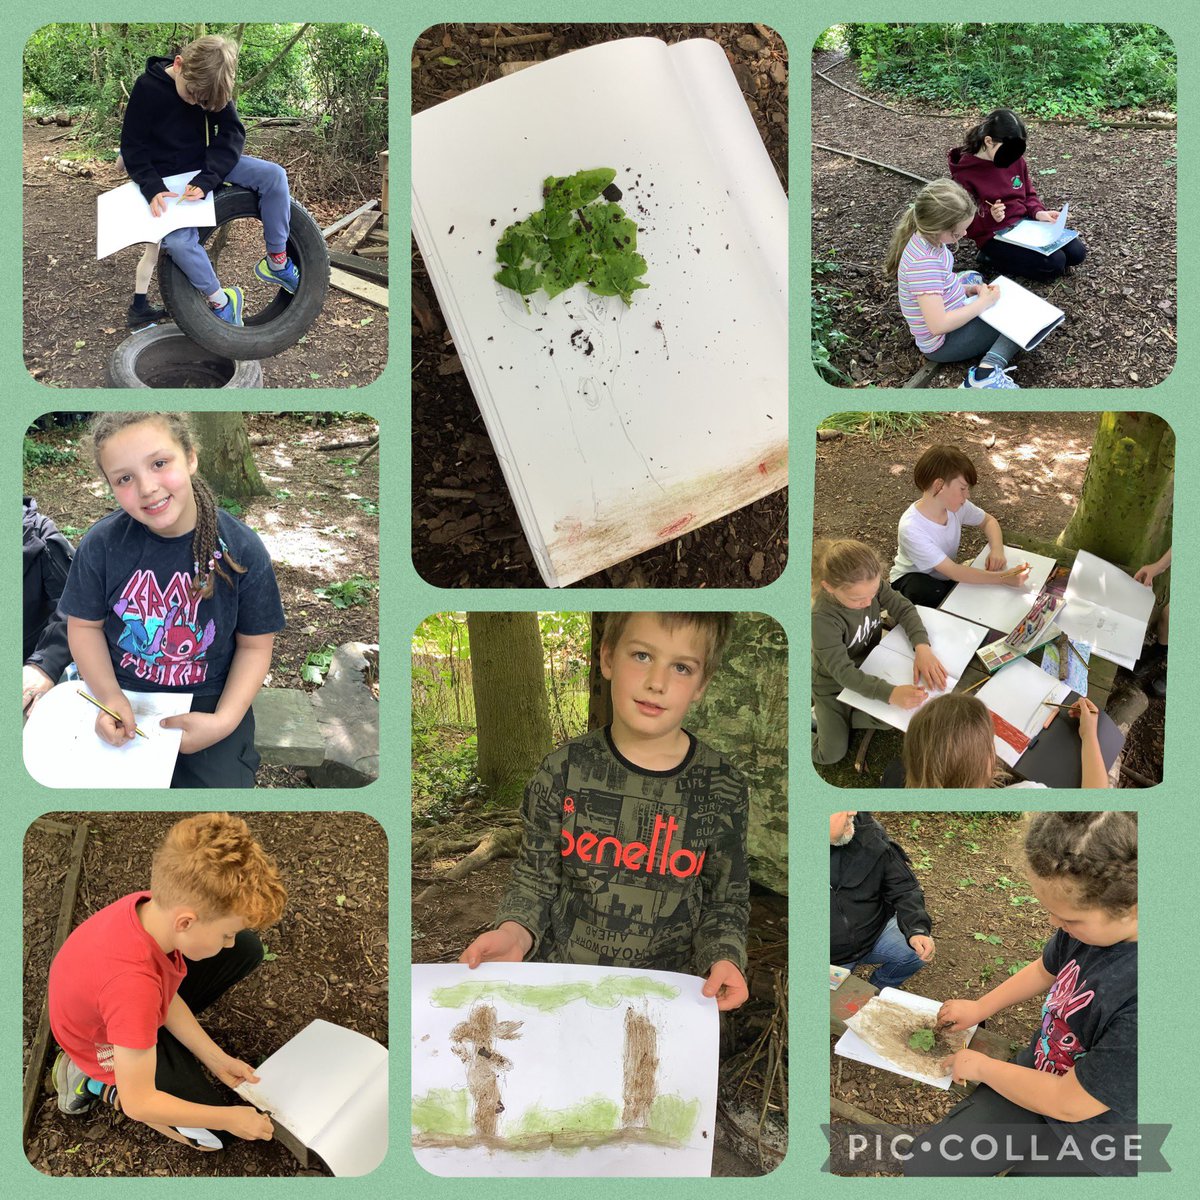 Year 4 are using natural things around us to create art🍃🌲🍂 #llpspd #llpsart